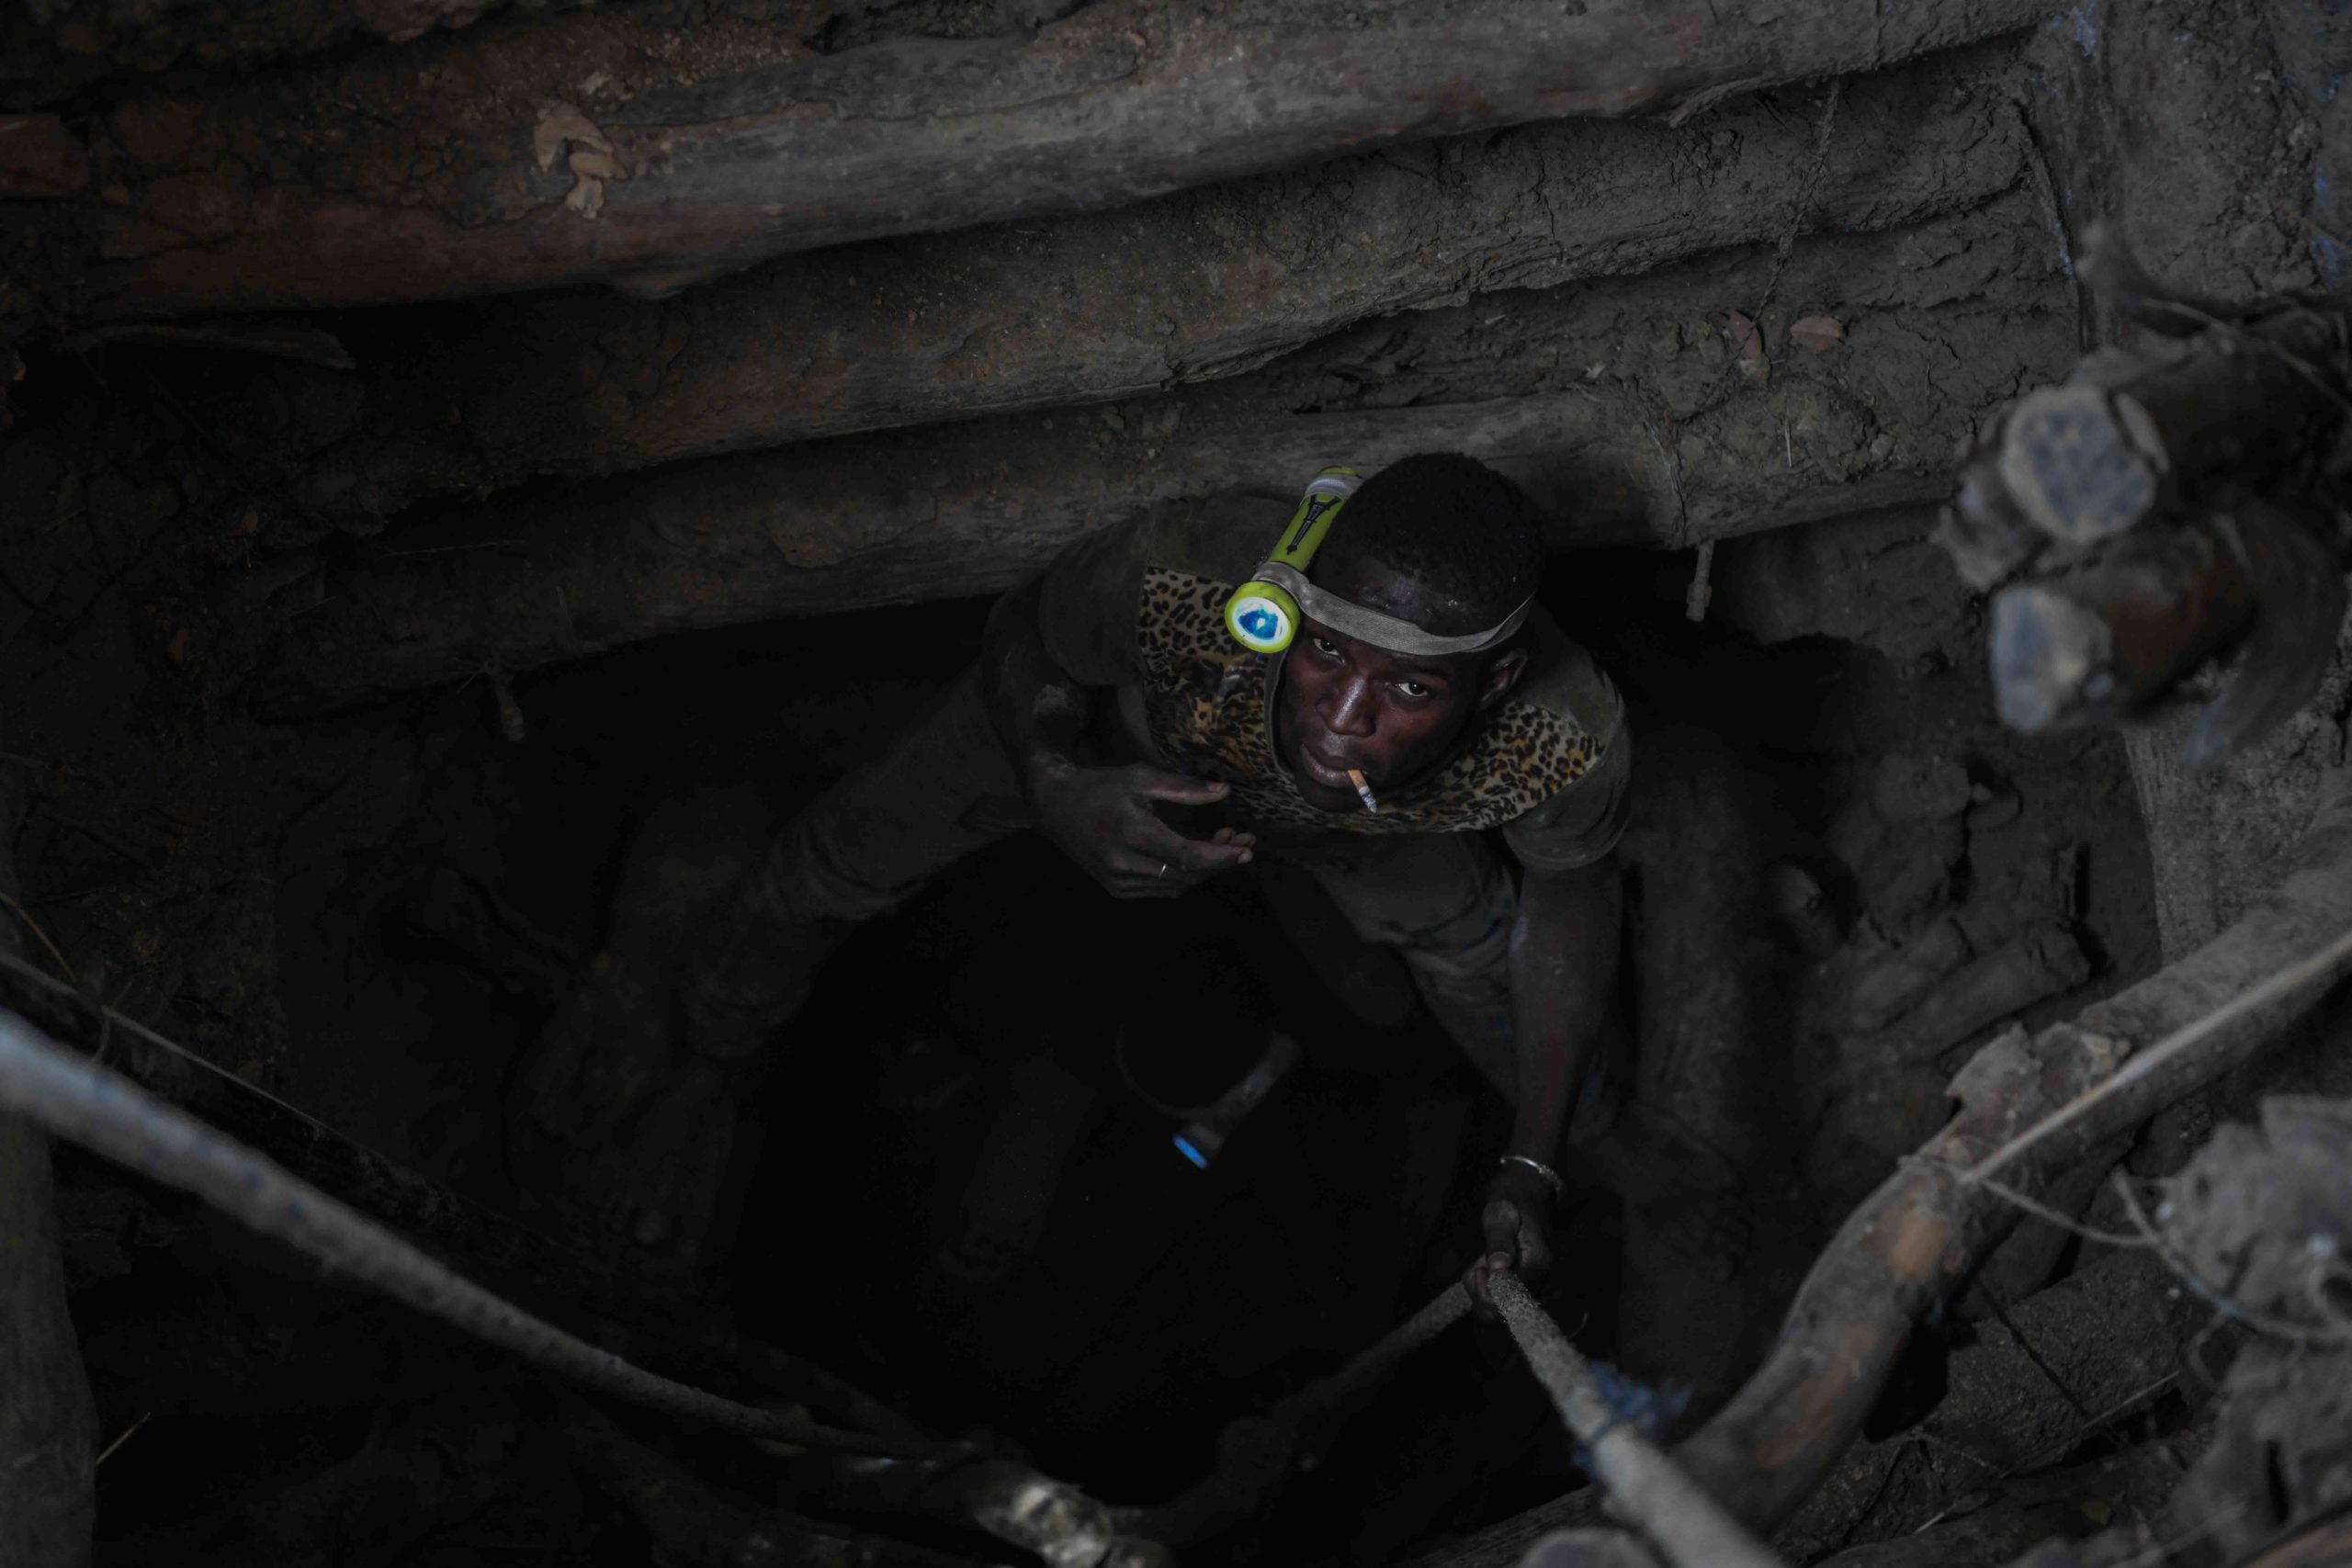 Traditional gold mining in Burkina Faso: the lottery, 30 meters underground